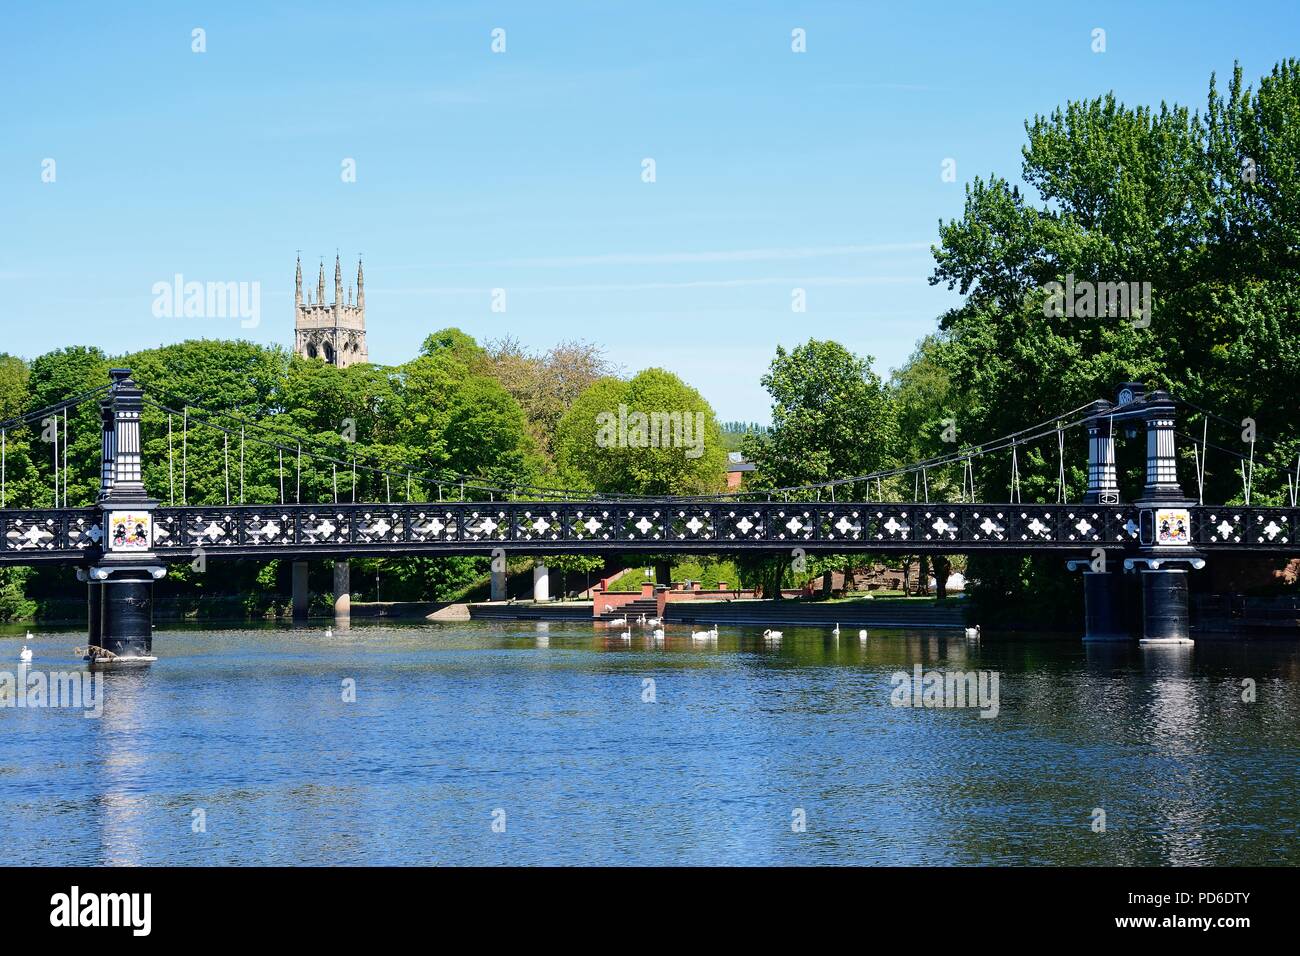 View of the Ferry Bridge also known as the Stapenhill Ferry Bridge and the River Trent, Burton upon Trent, Staffordshire, England, UK, Western Europe. Stock Photo